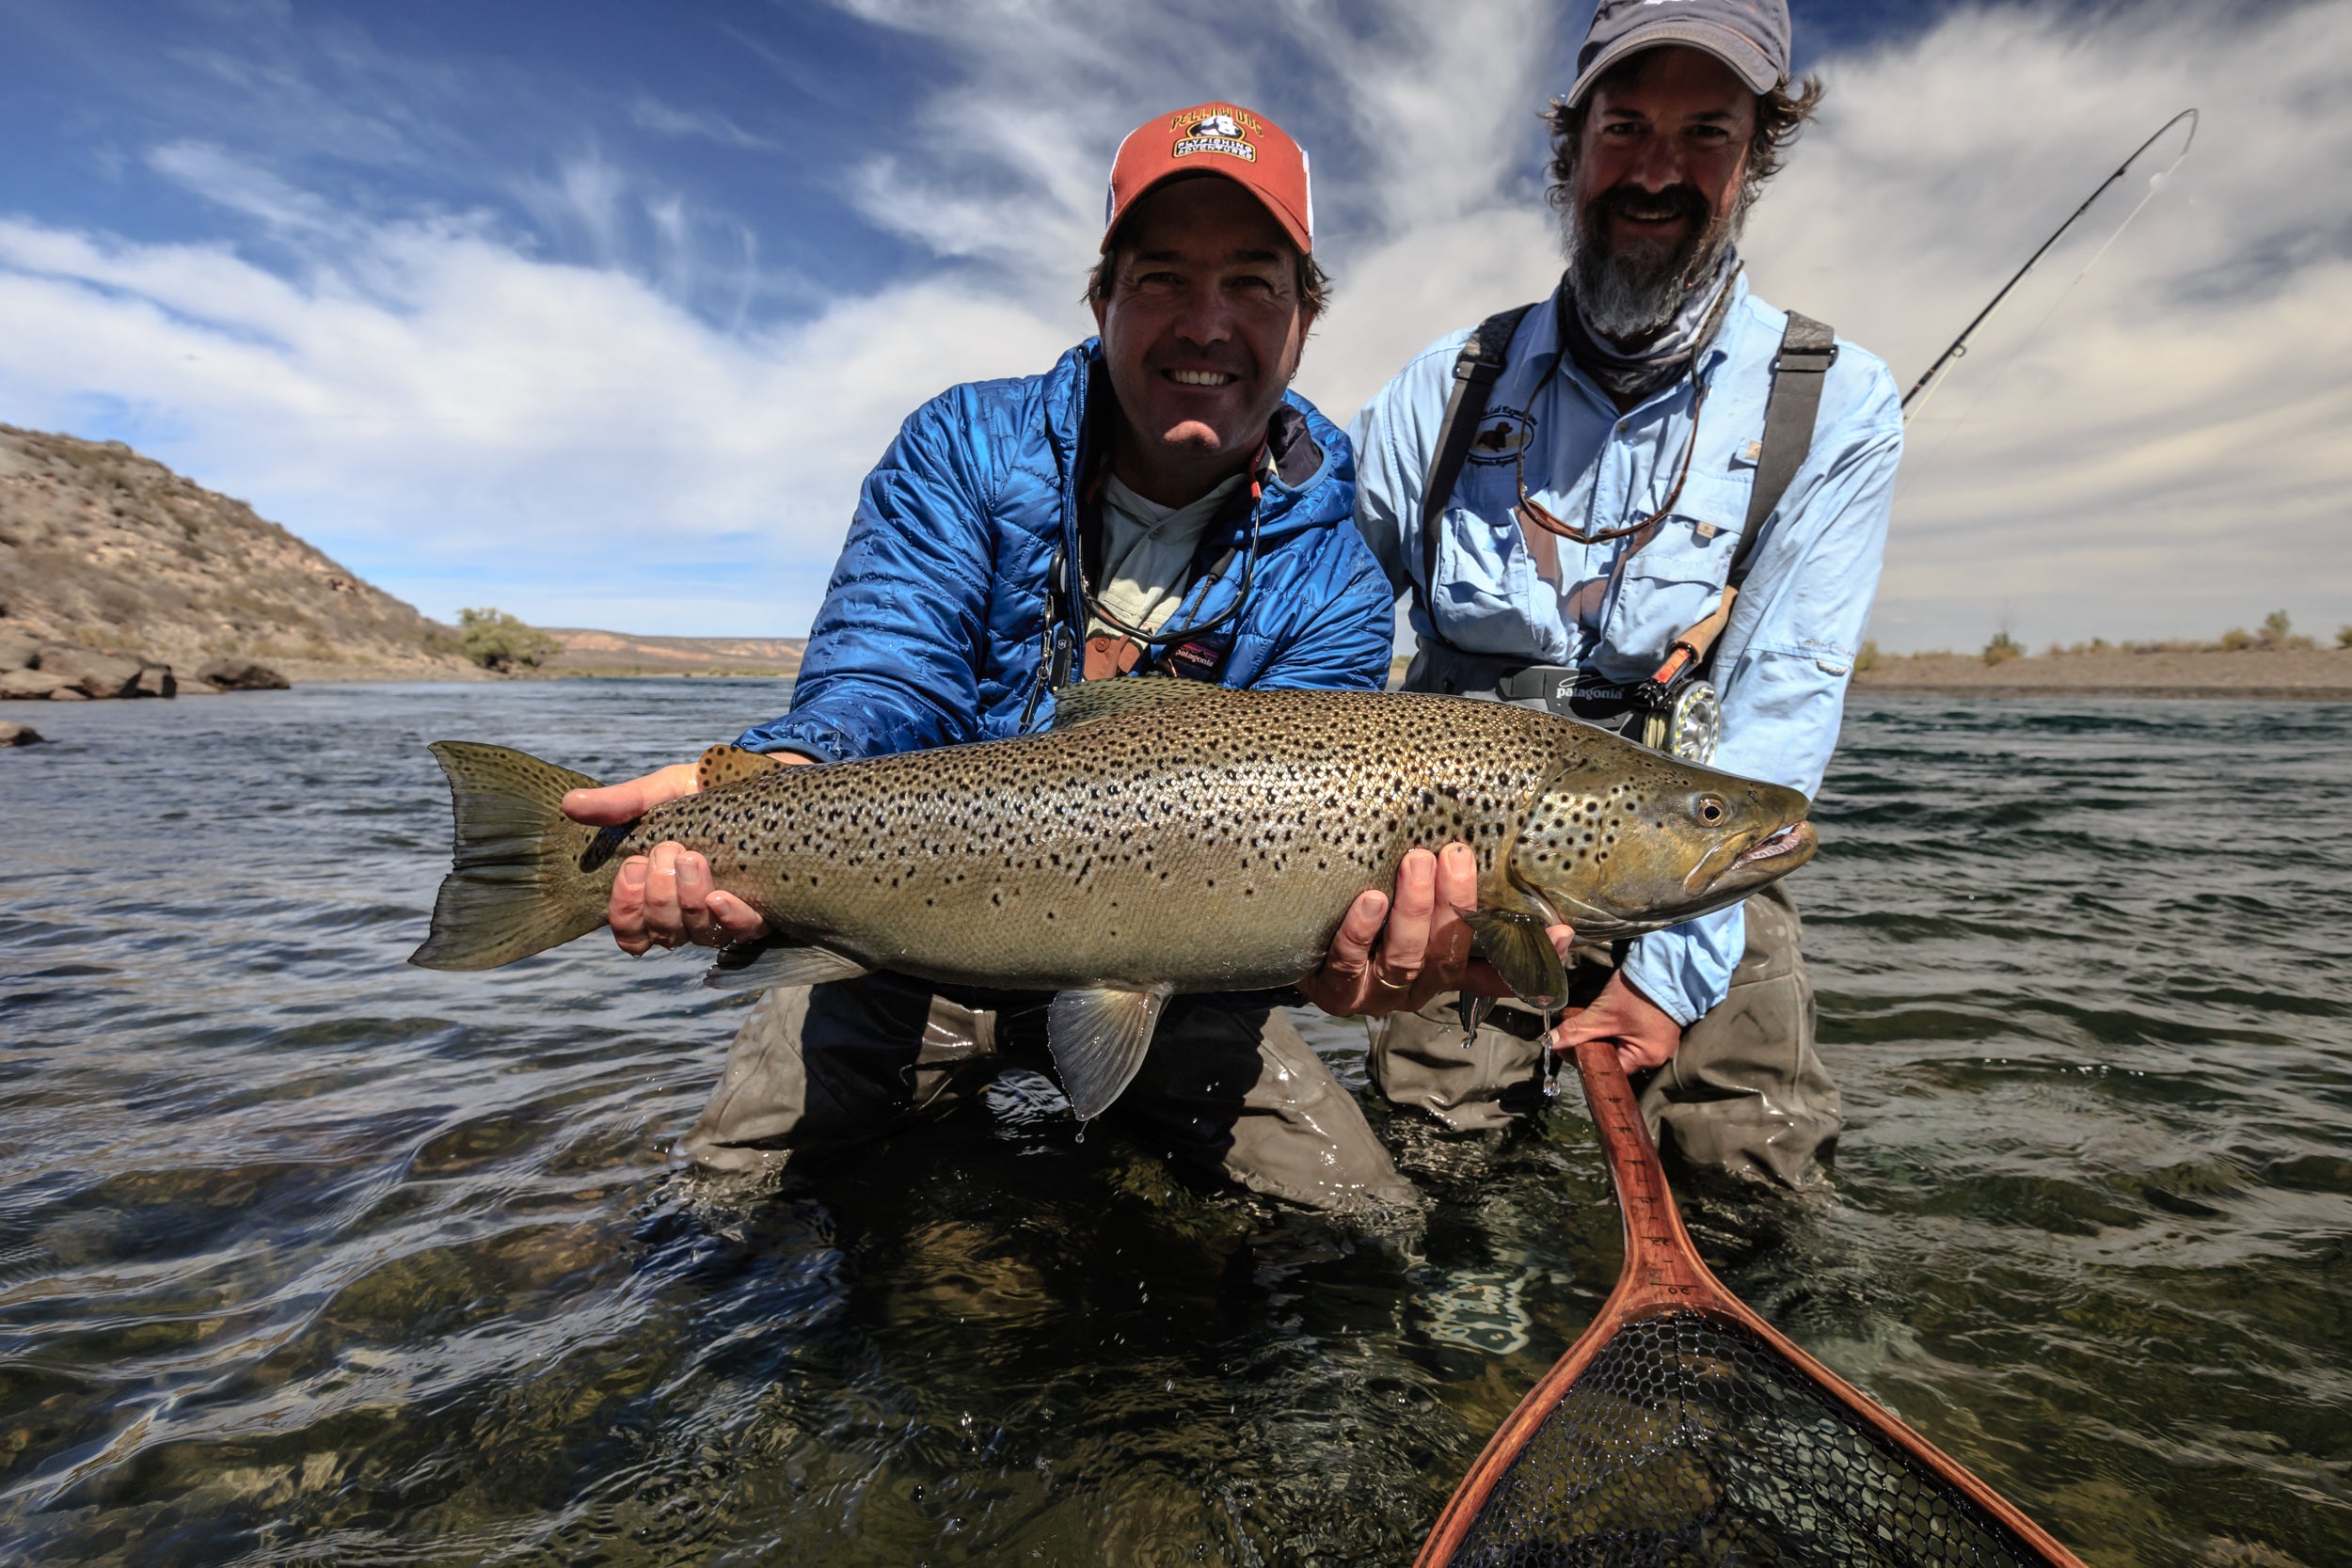 Fly fishing Patagonia's famous trout rivers